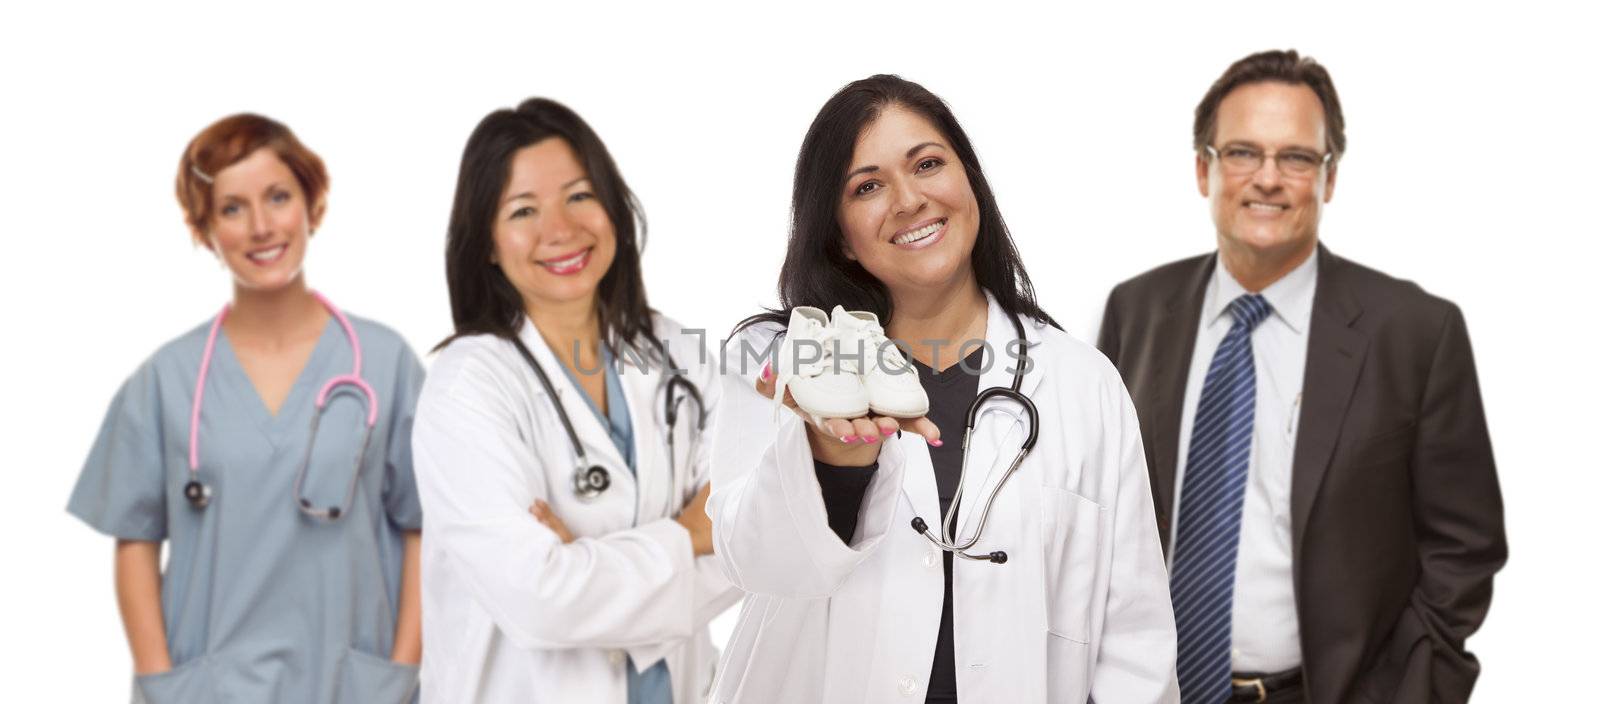 Attractive Hispanic Female Doctor or Nurse Holding Out Baby Shoes and Support Staff Behind Isolated on a White Background.